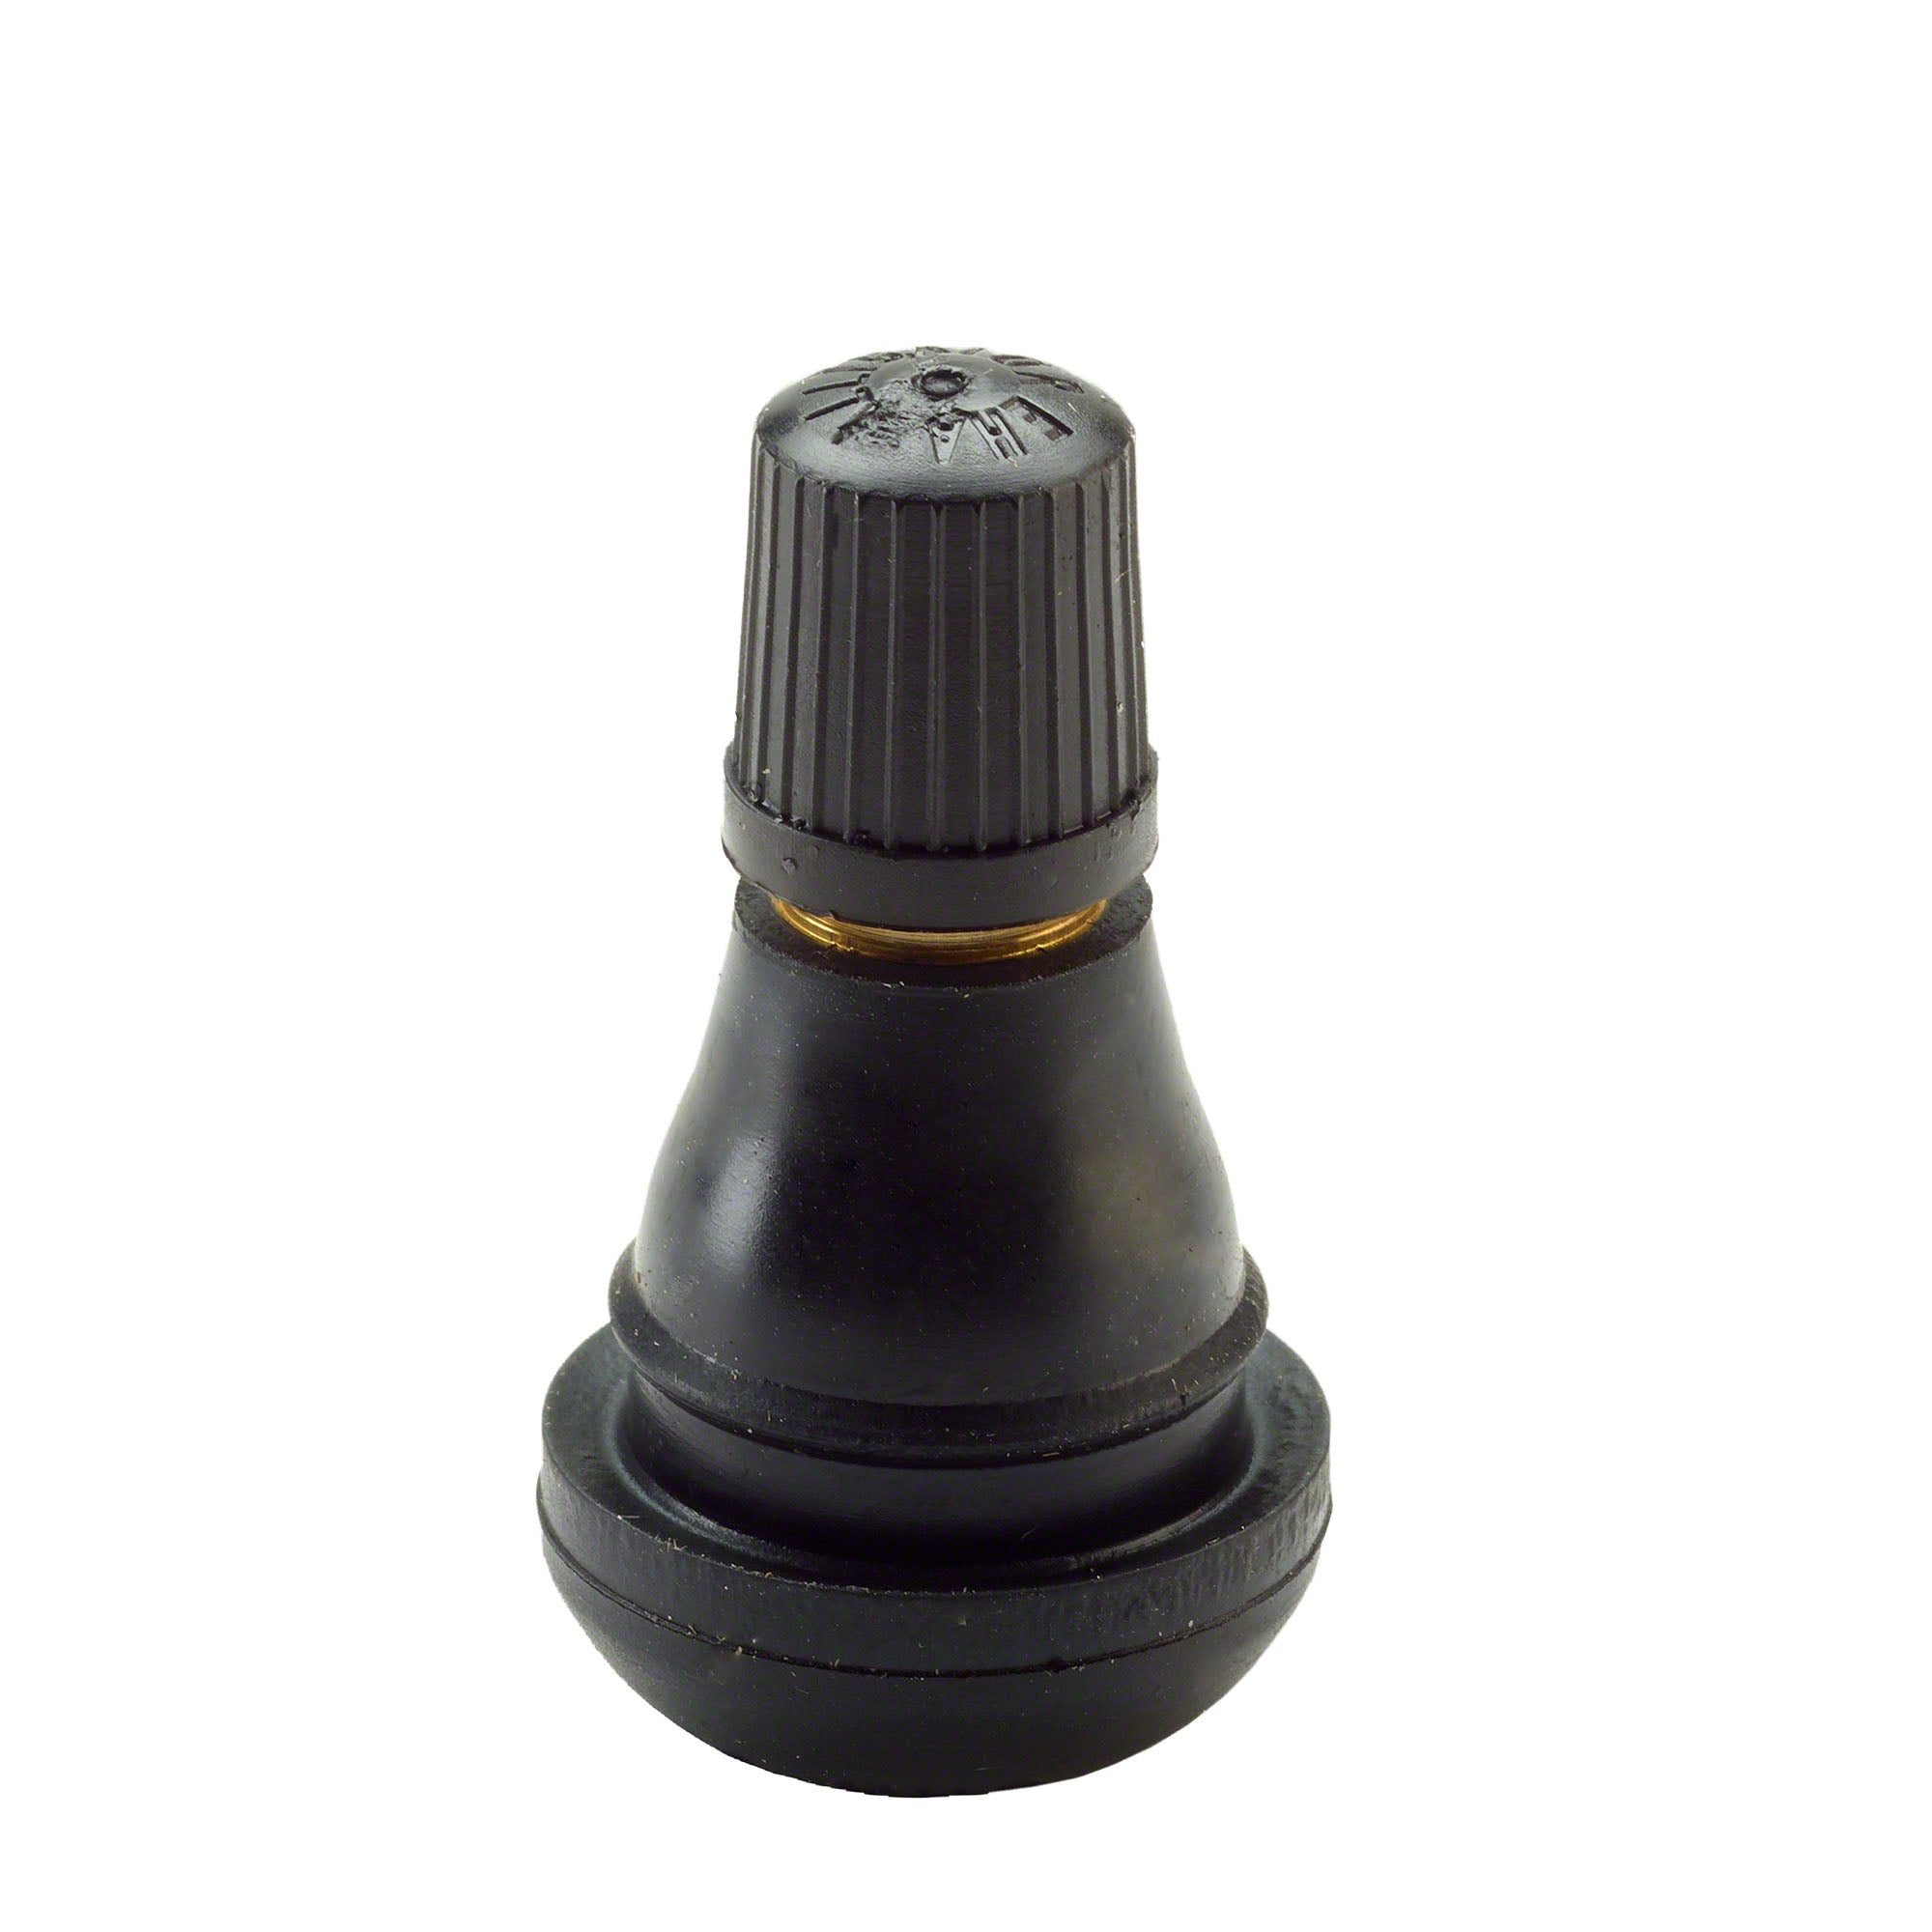 TR412 - Snap-In Tire Valve - 0.88" Height - Bag of 100